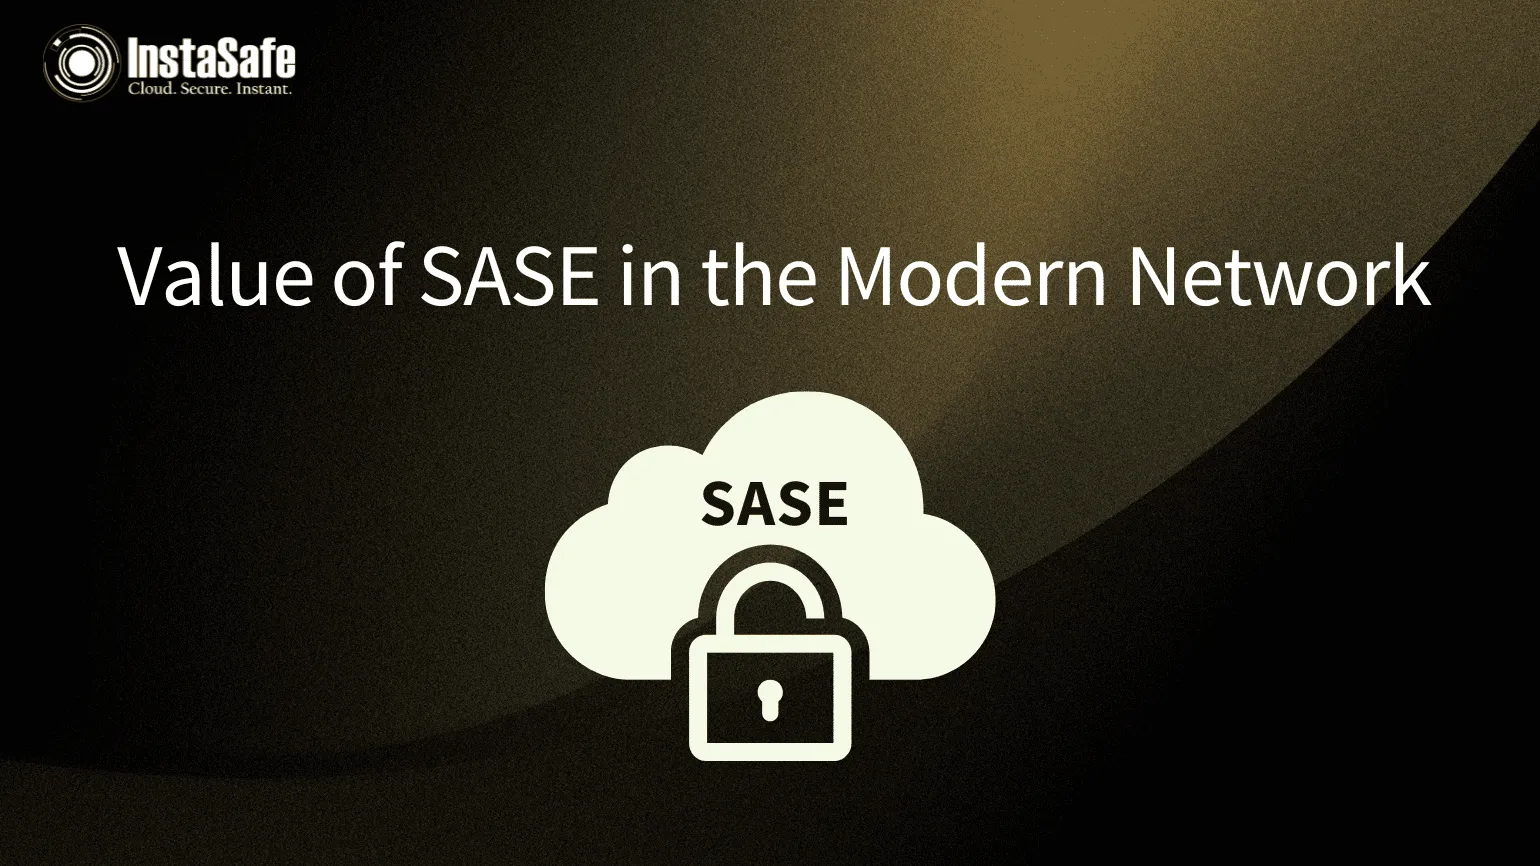 Value of SASE in the Modern Network